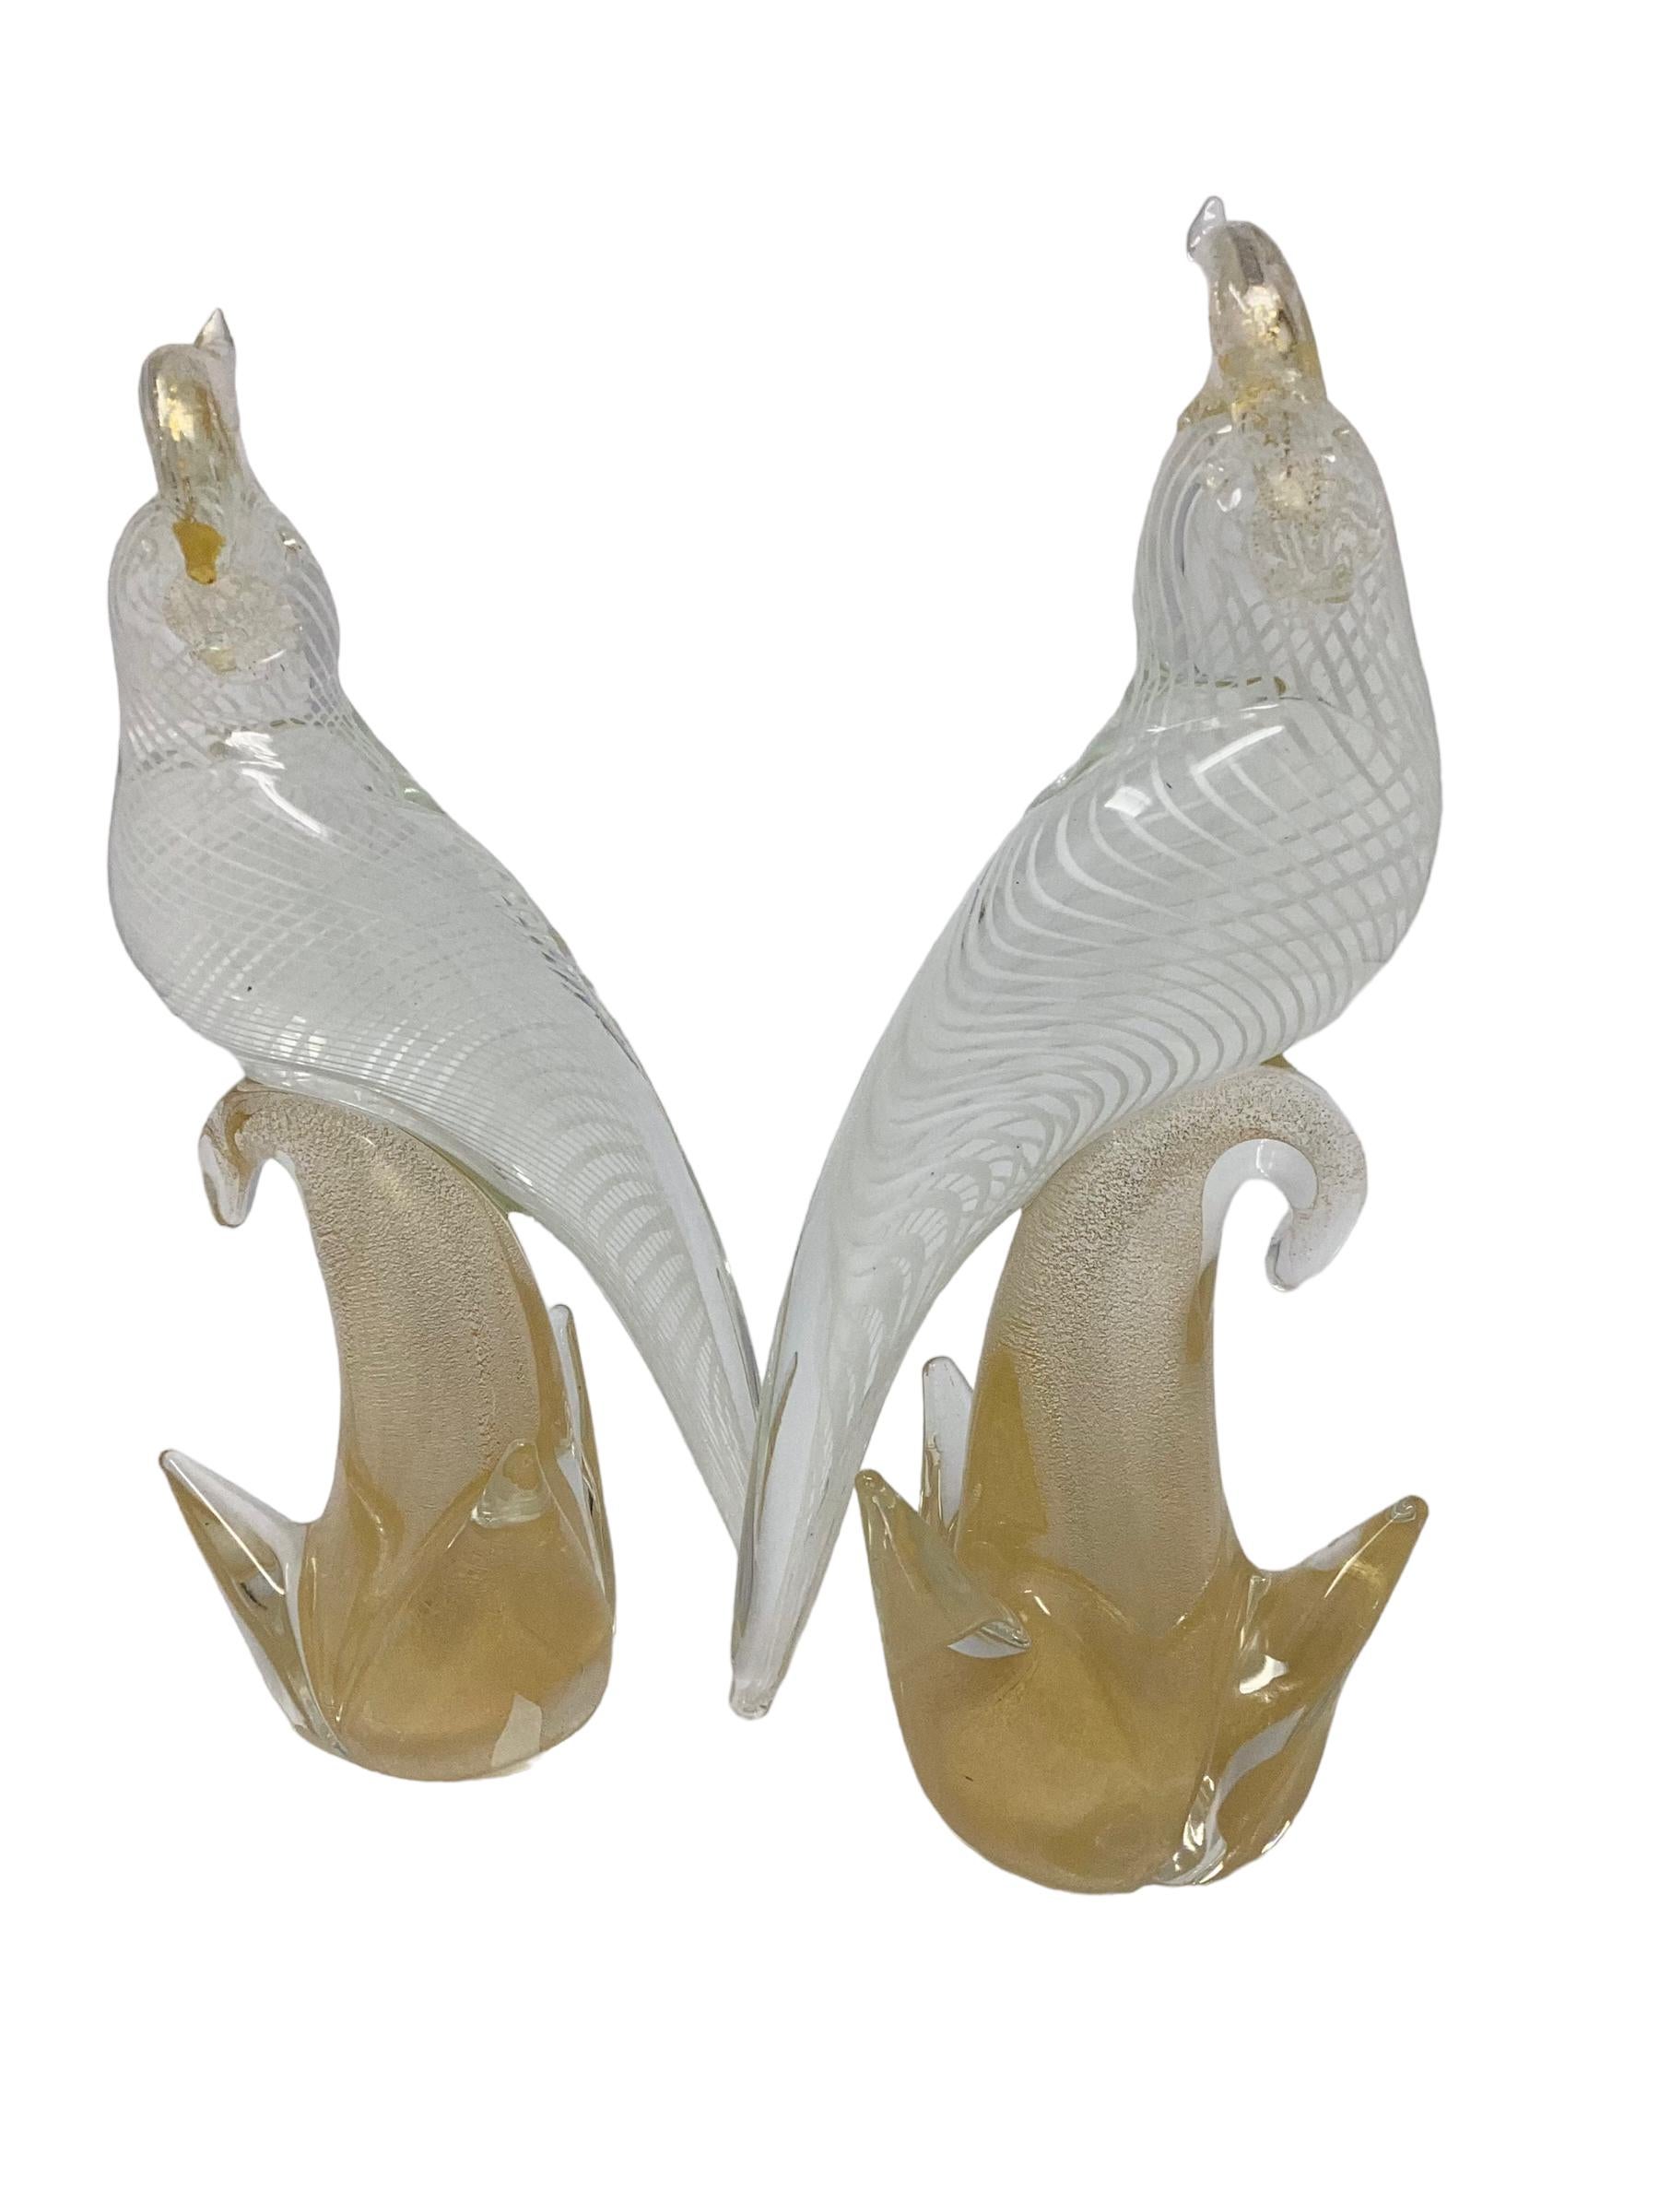 Pair of Vintage Murano Glass Birds. These birds are in the style of Archimede Seguso who was known for his animal sculptures. The ribbon decorated birds are delicately perched on a gold infused branch. Both are in excellent vintage condition.